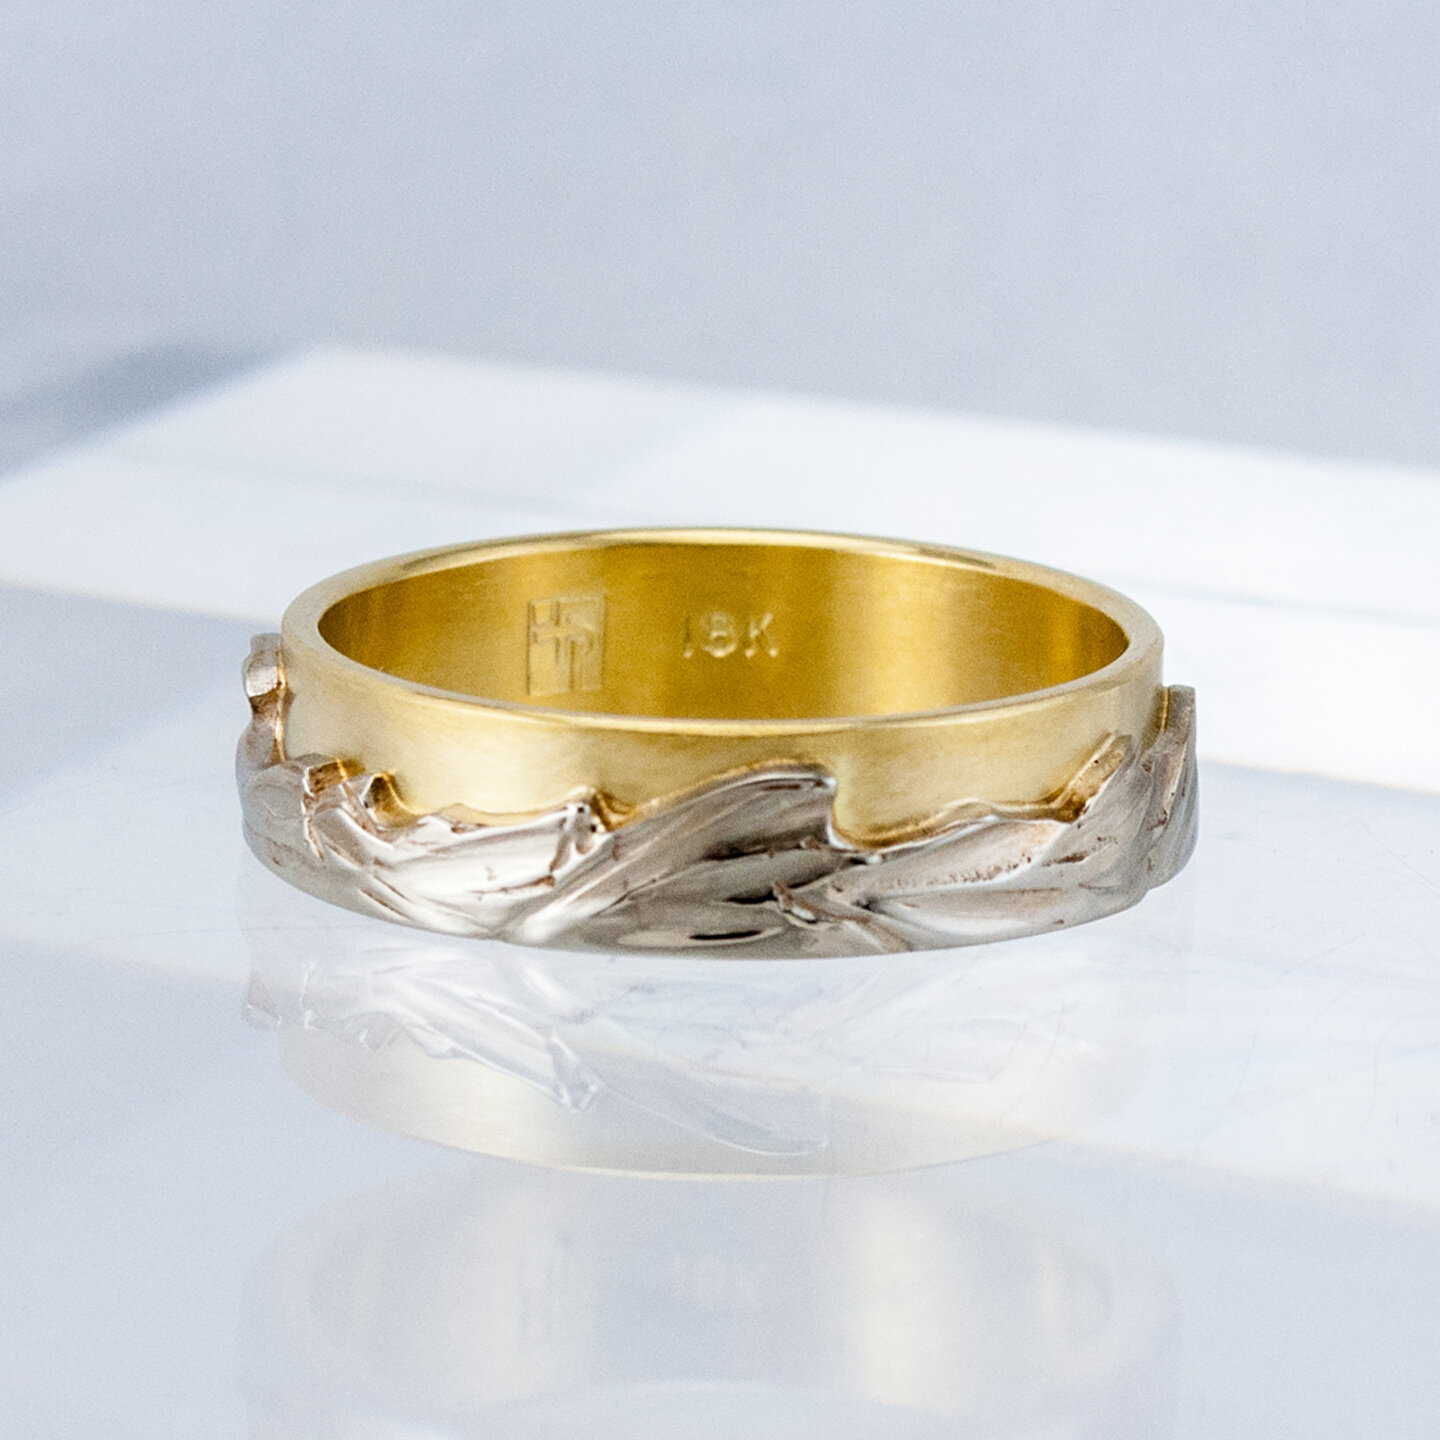 Bands - Shop — Fairbank and Perry Goldsmiths